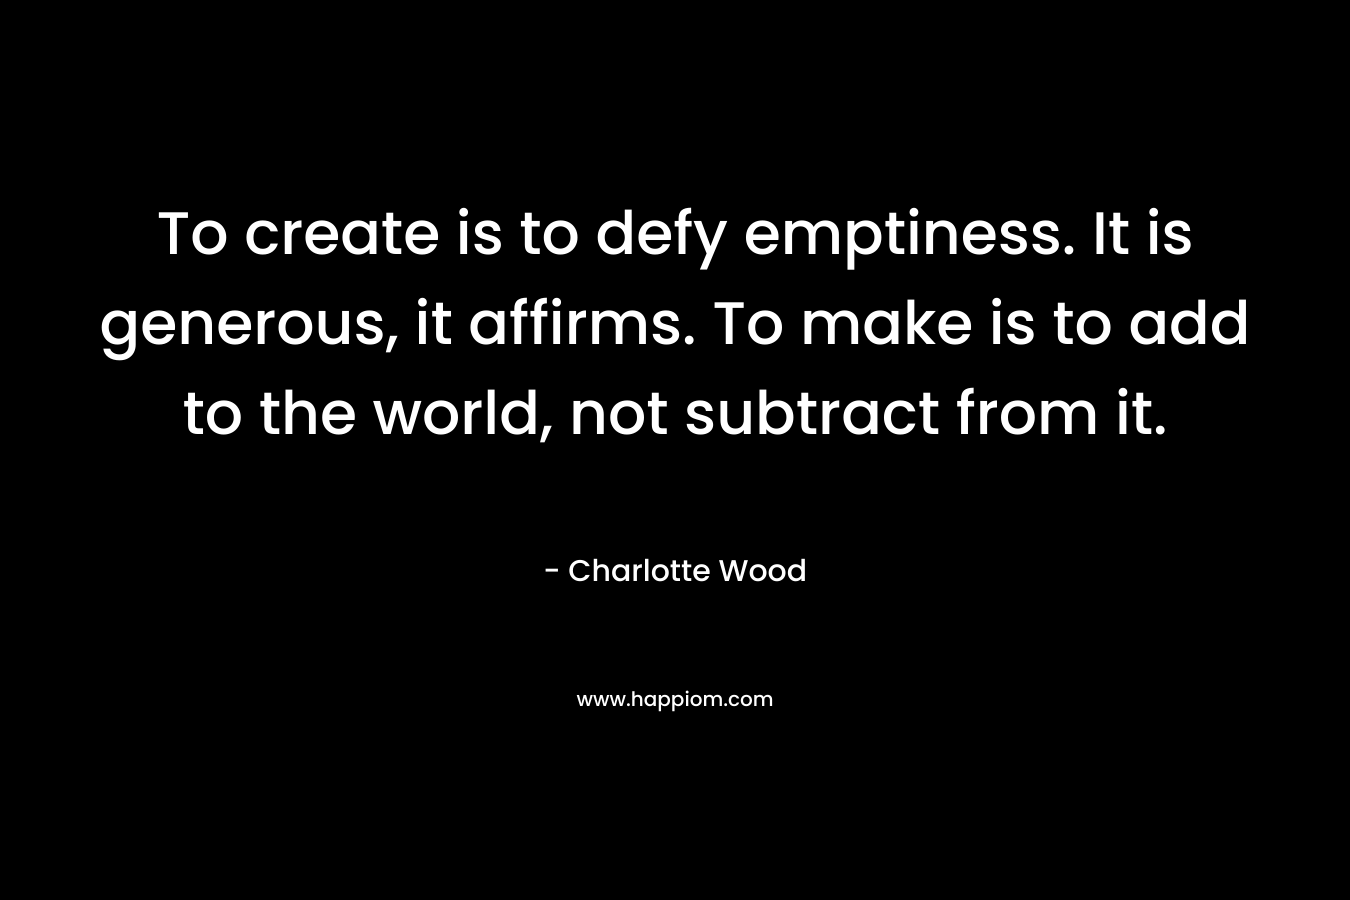 To create is to defy emptiness. It is generous, it affirms. To make is to add to the world, not subtract from it. – Charlotte Wood